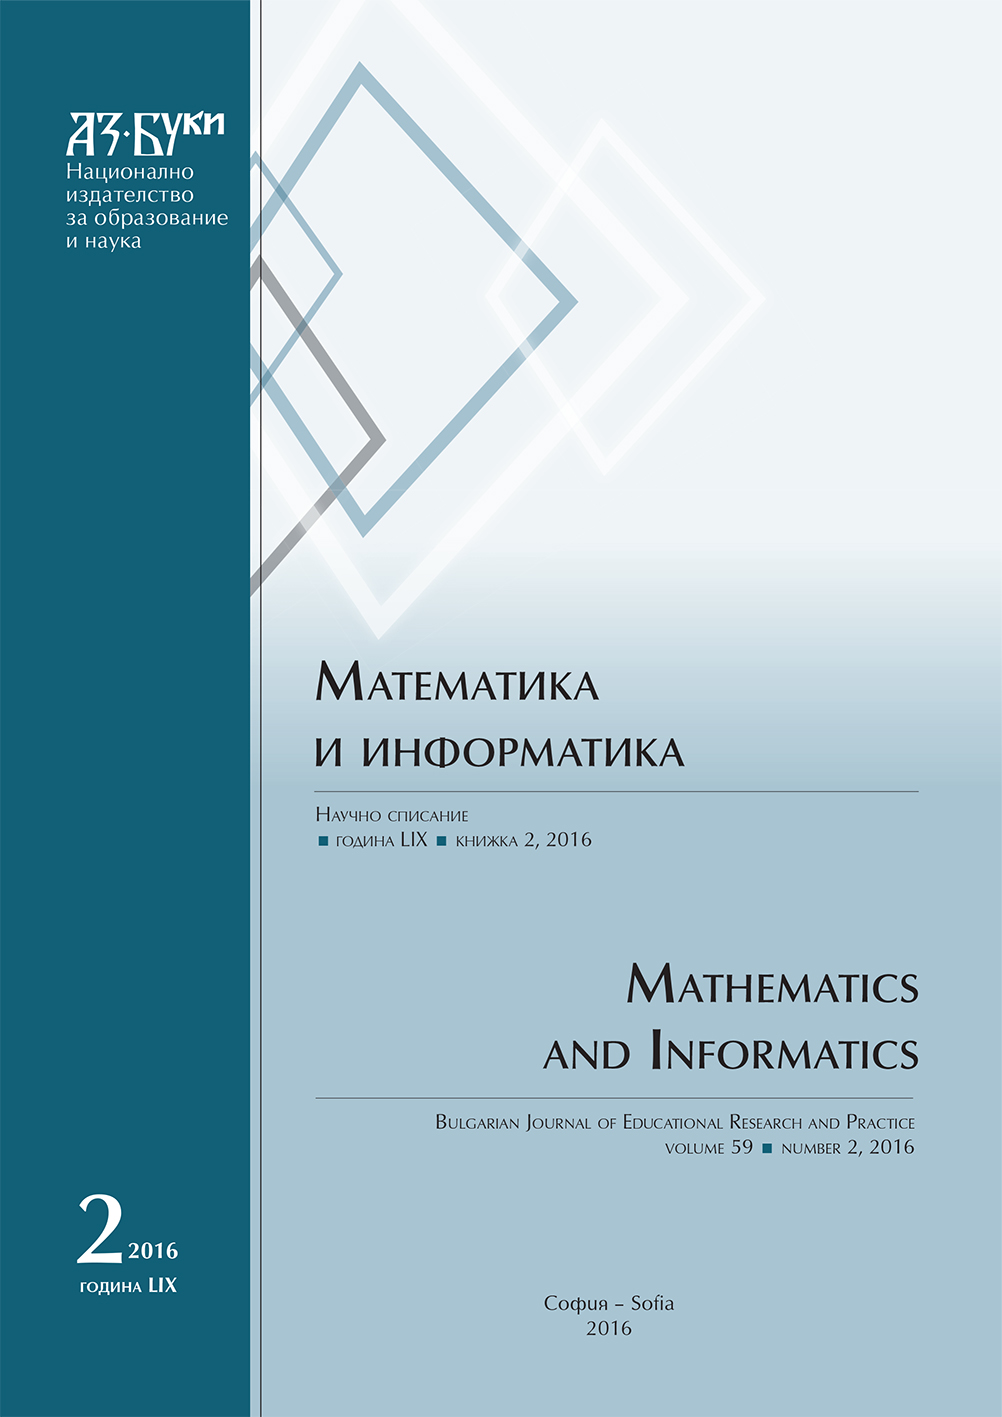 Comparative Analysis Regarding the Use of Complex Numbers in Secondary School Cover Image